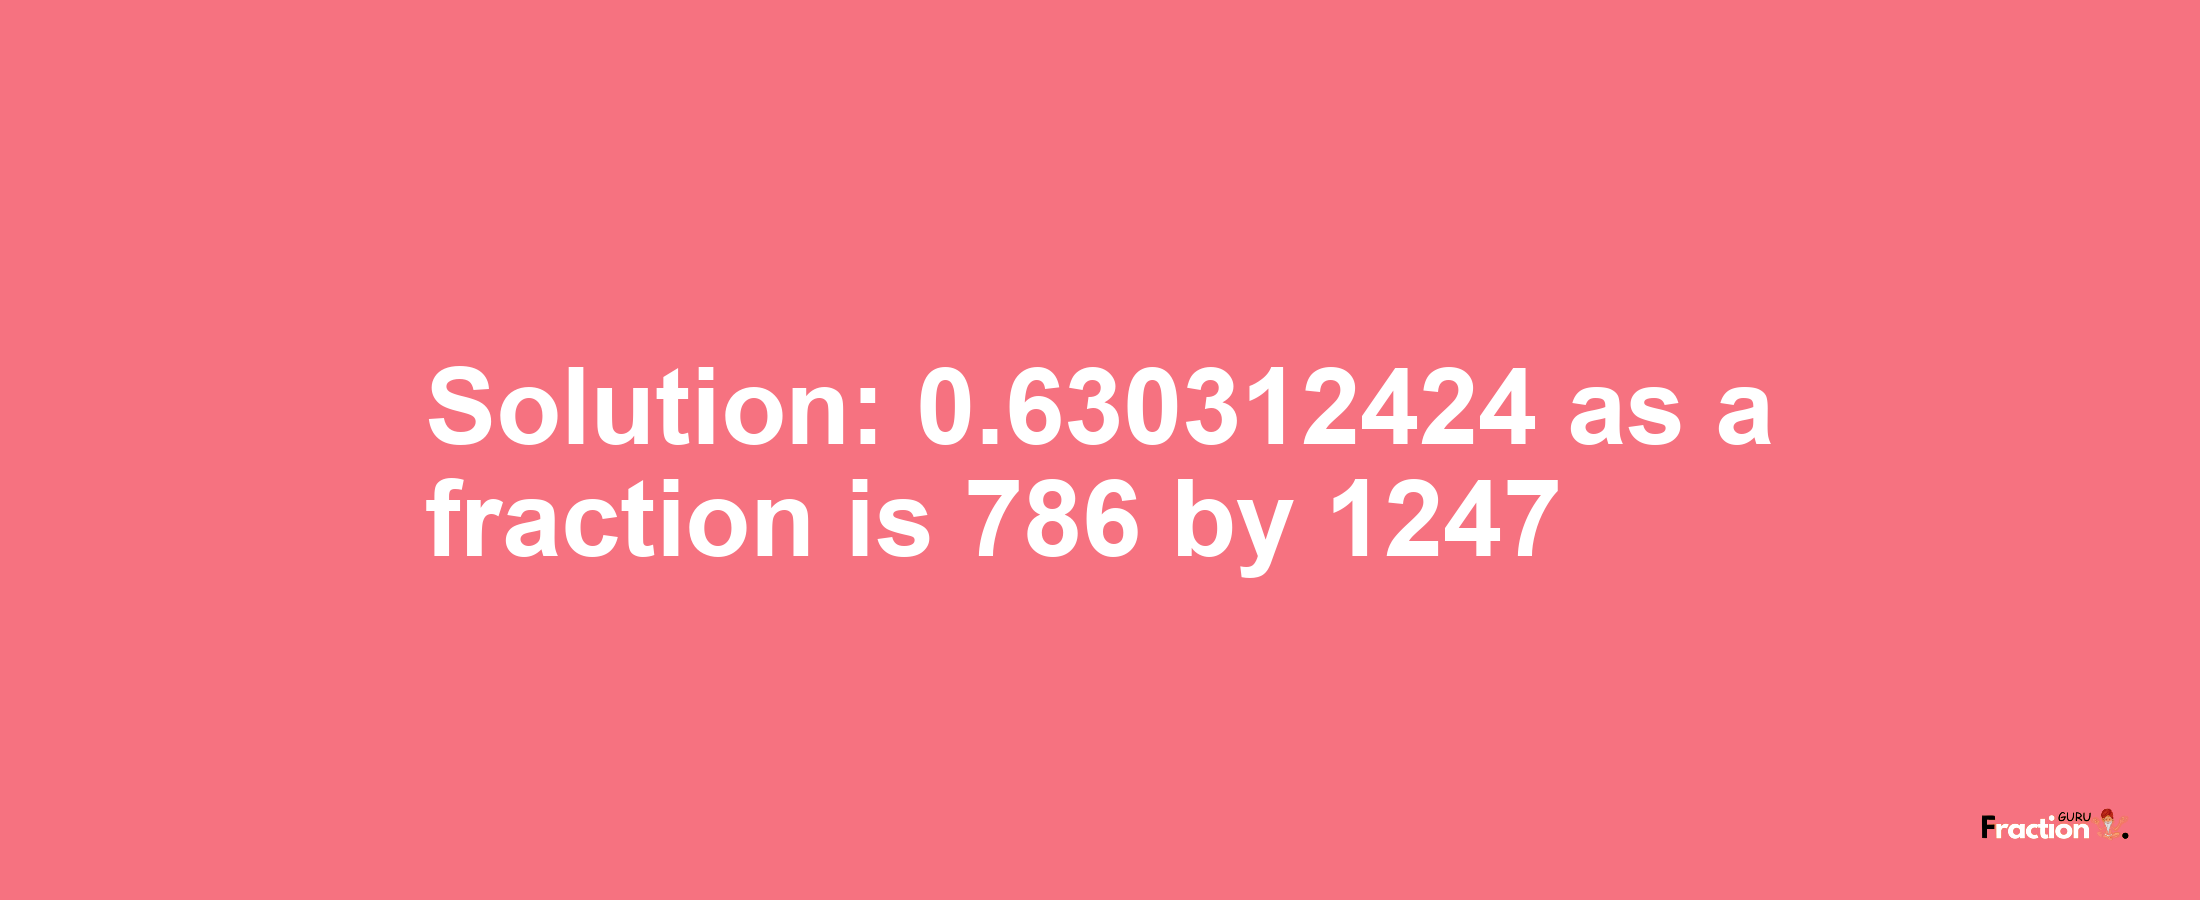 Solution:0.630312424 as a fraction is 786/1247